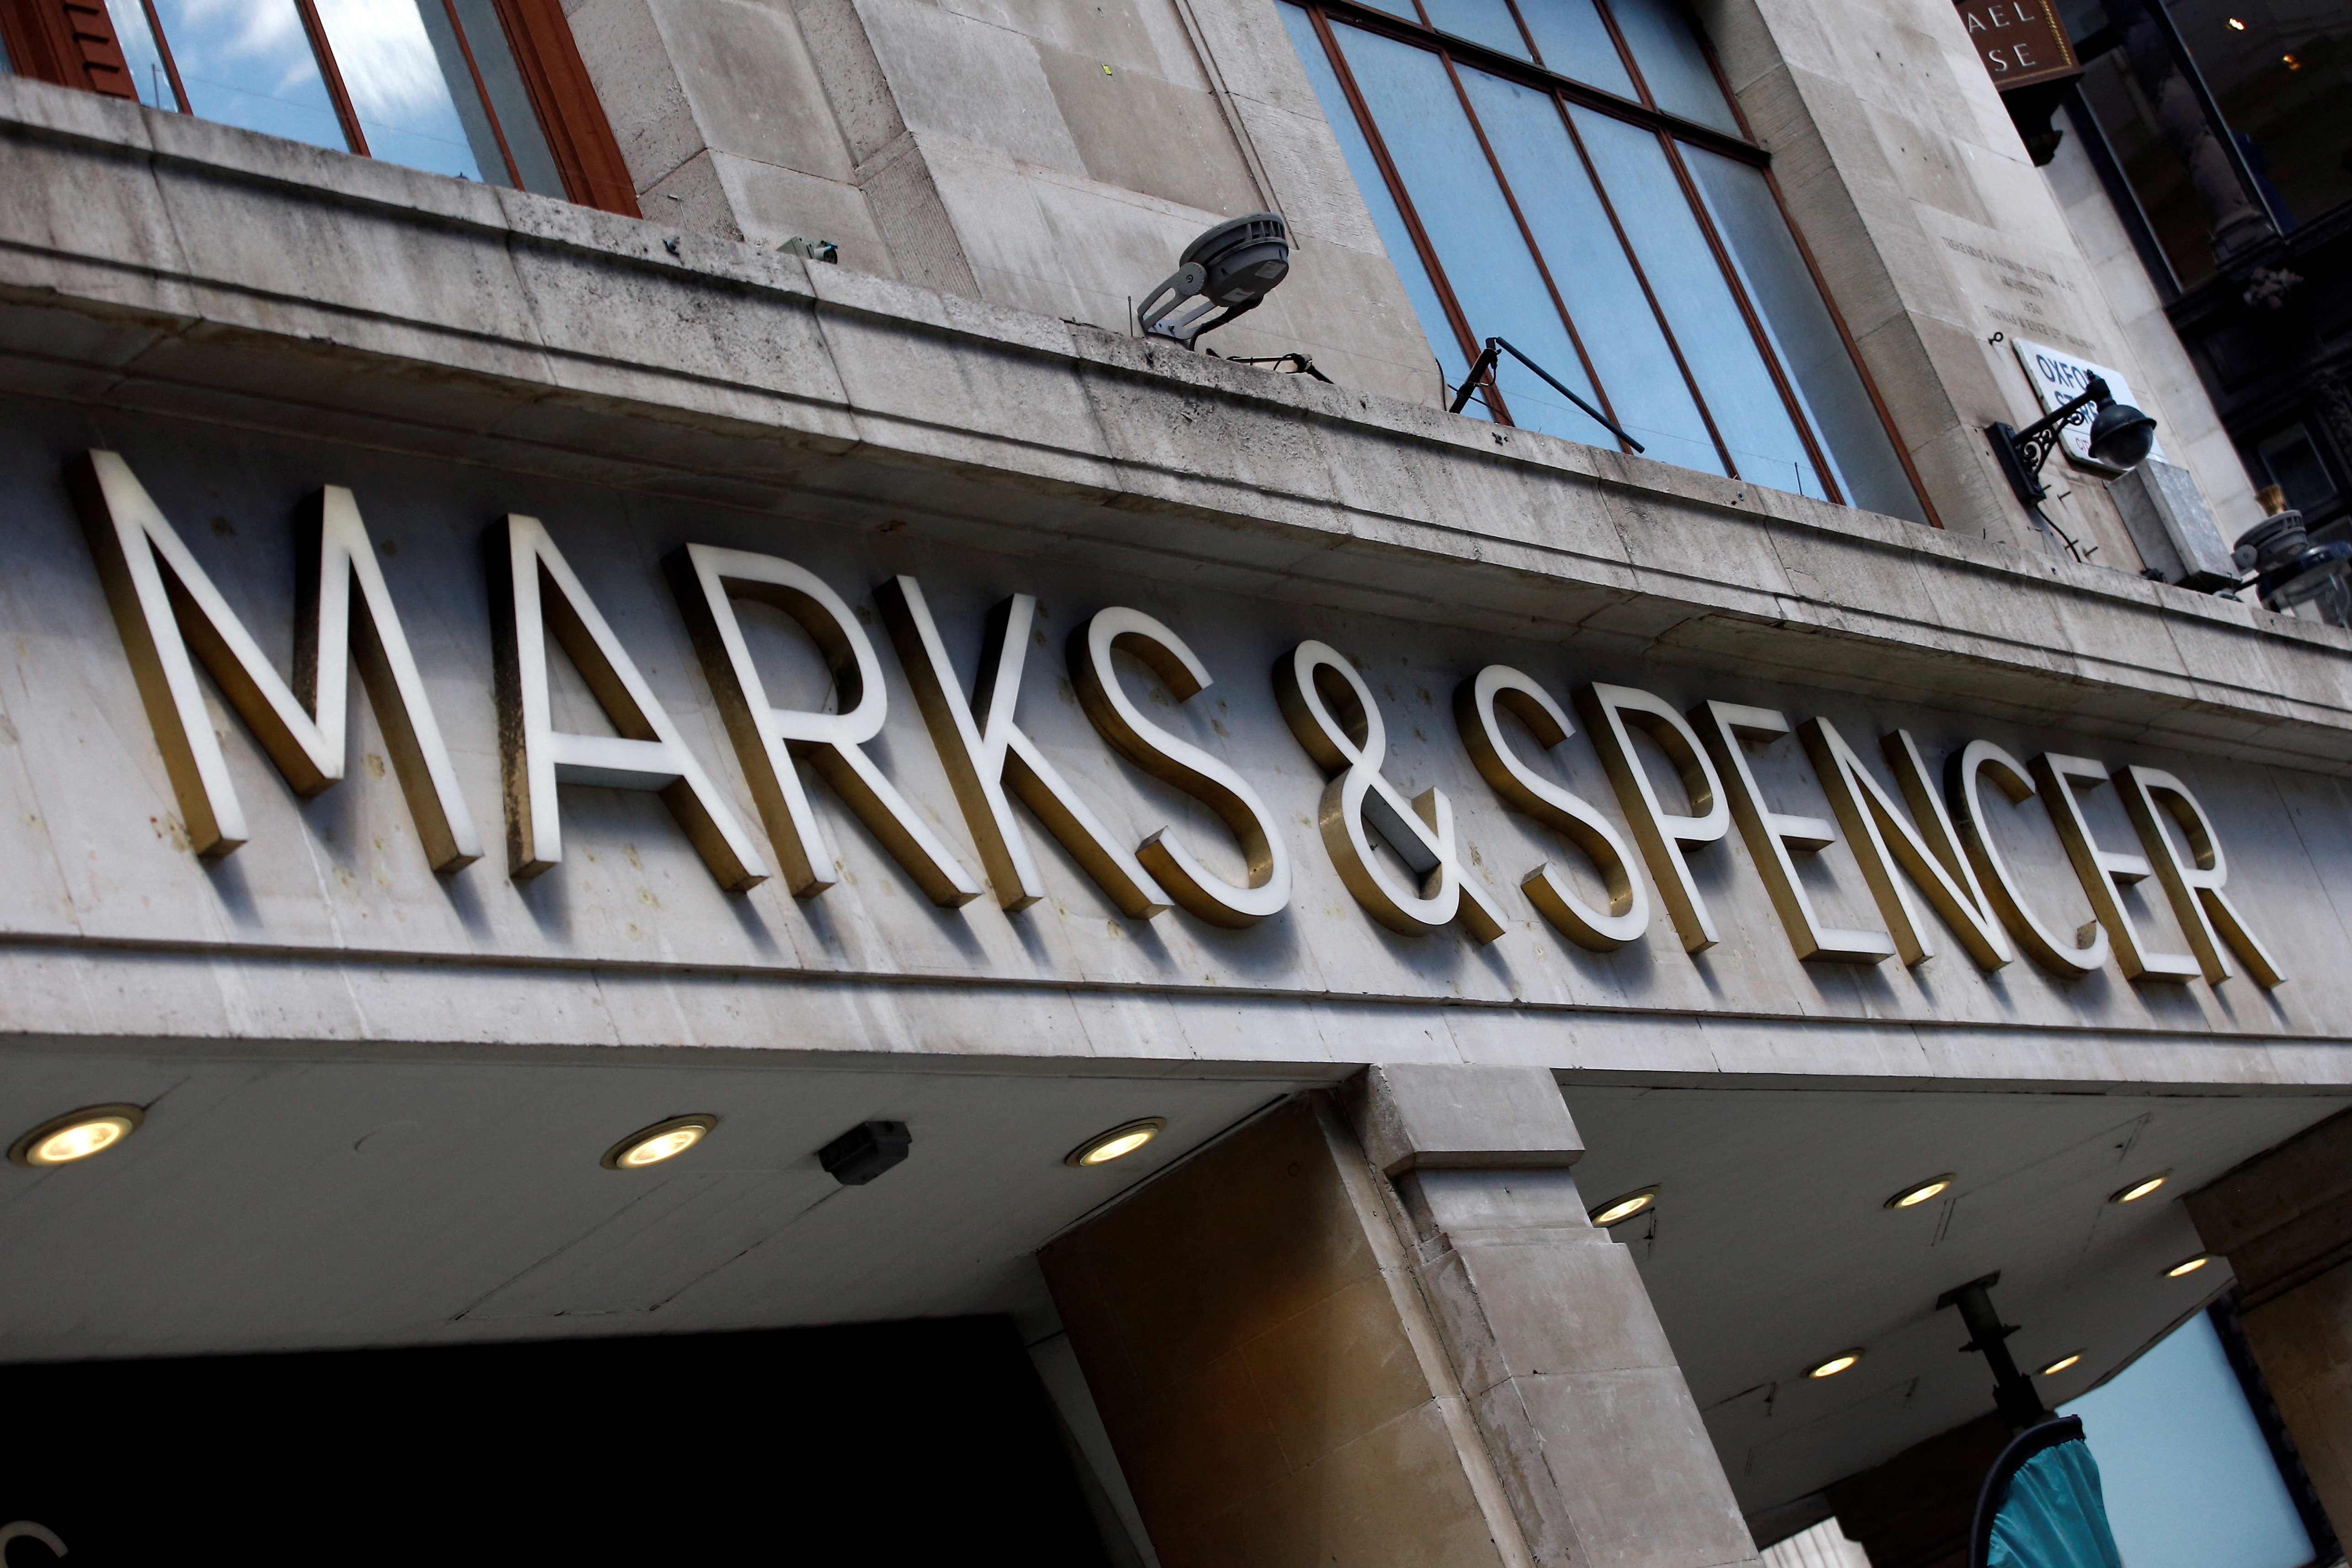 UK's M&S to raise store workers' pay by 10.1%